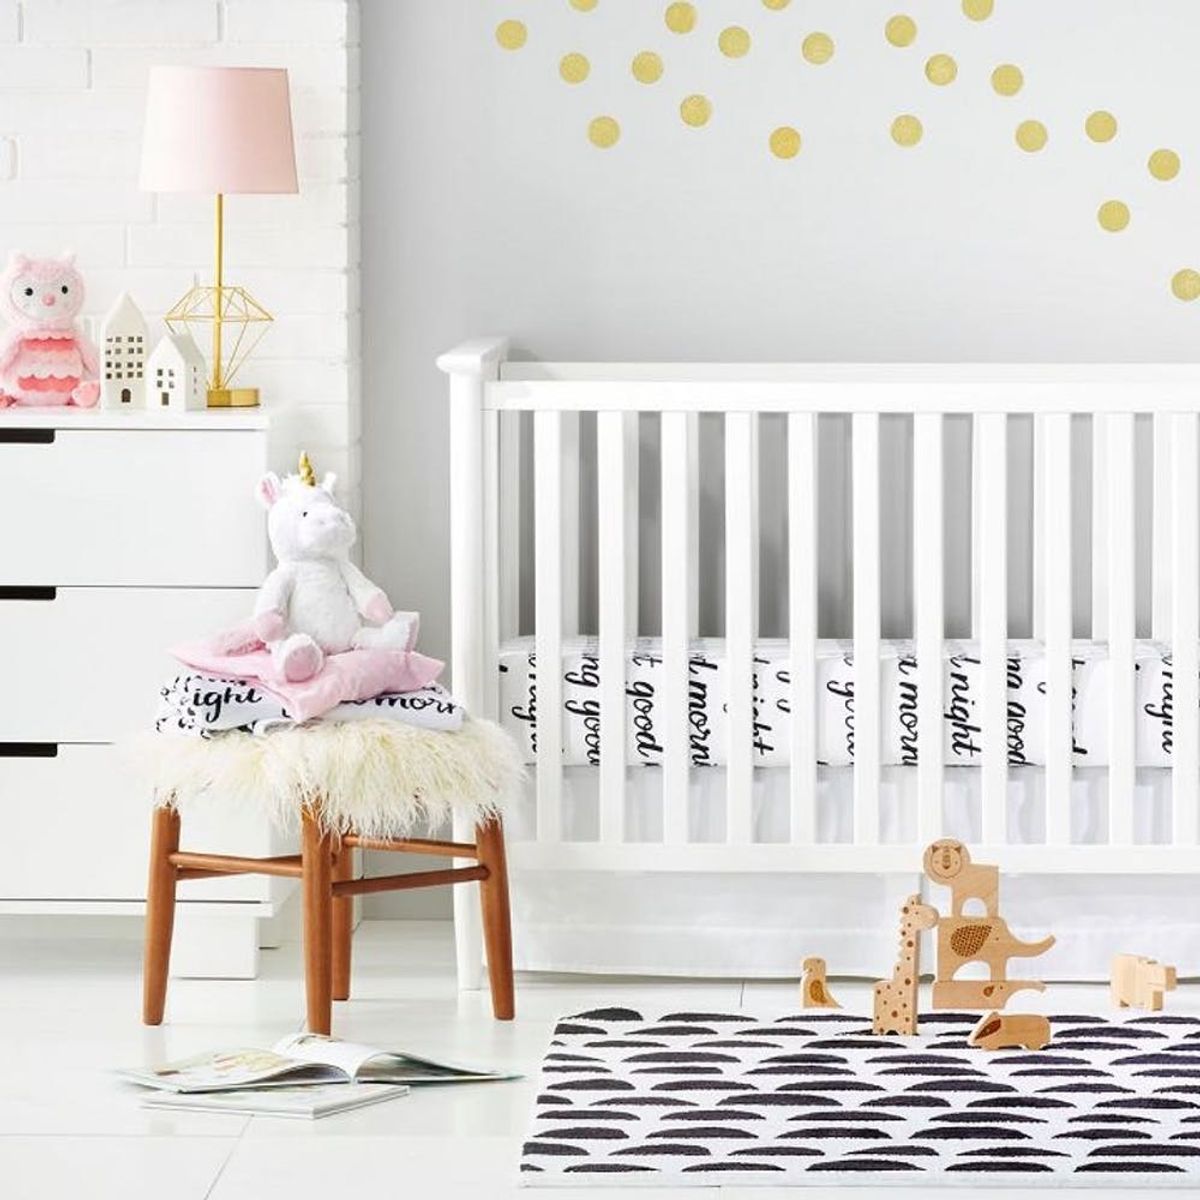 Target’s New Baby Line Will Make Your Nursery Pinterest-Perfect